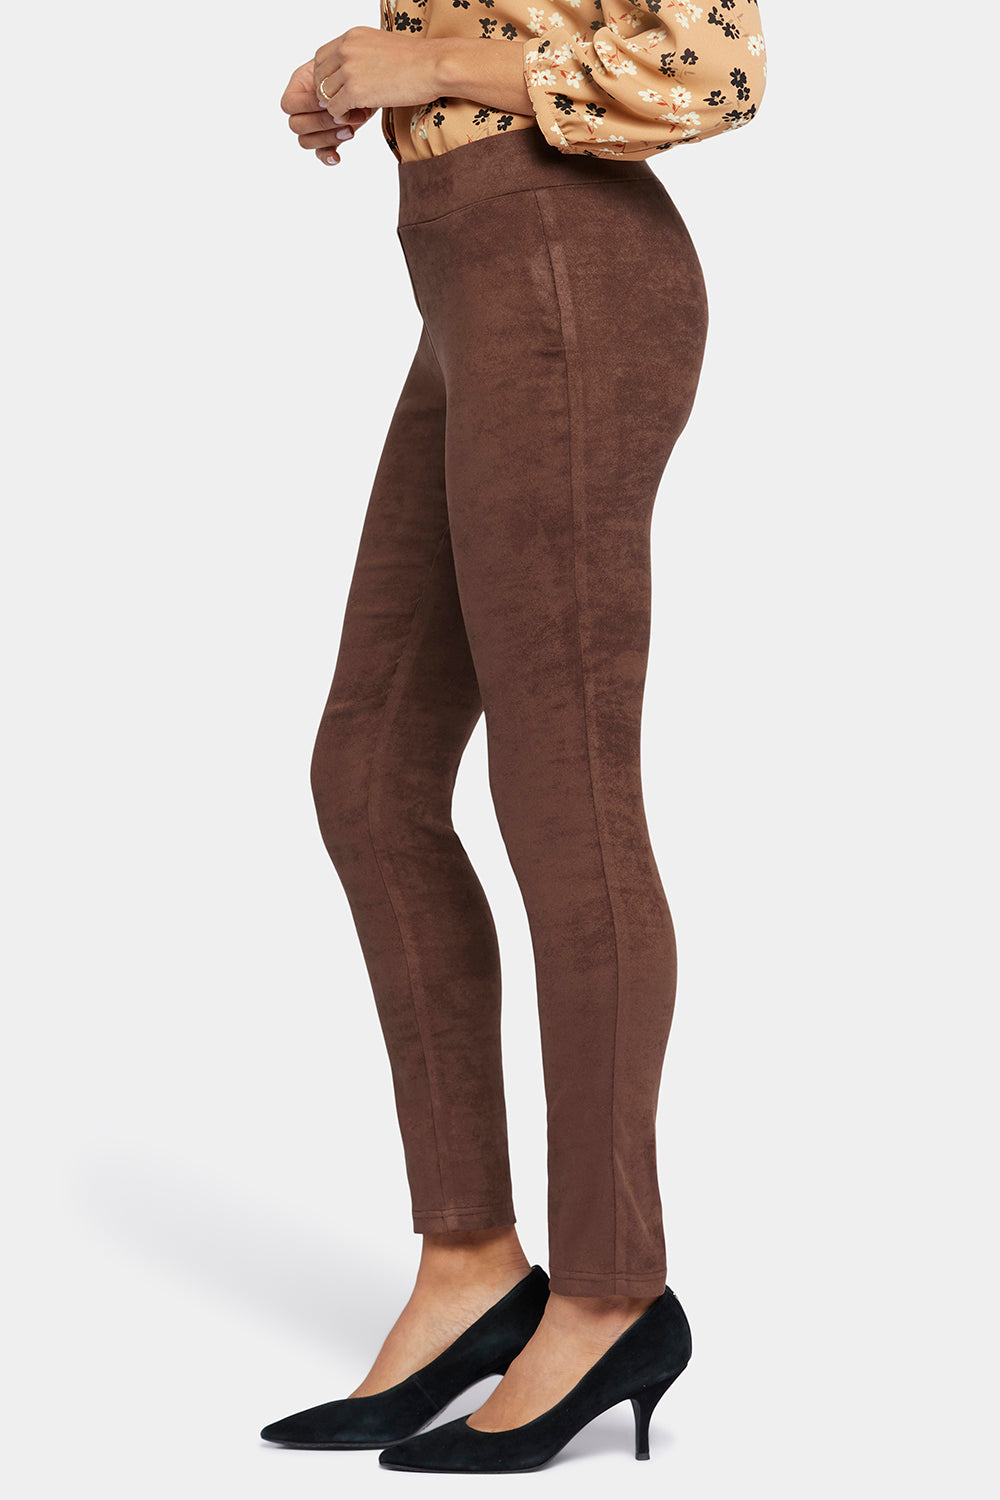 NWT LOFT Faux Leather Leggings in Brown- Size Large Petite